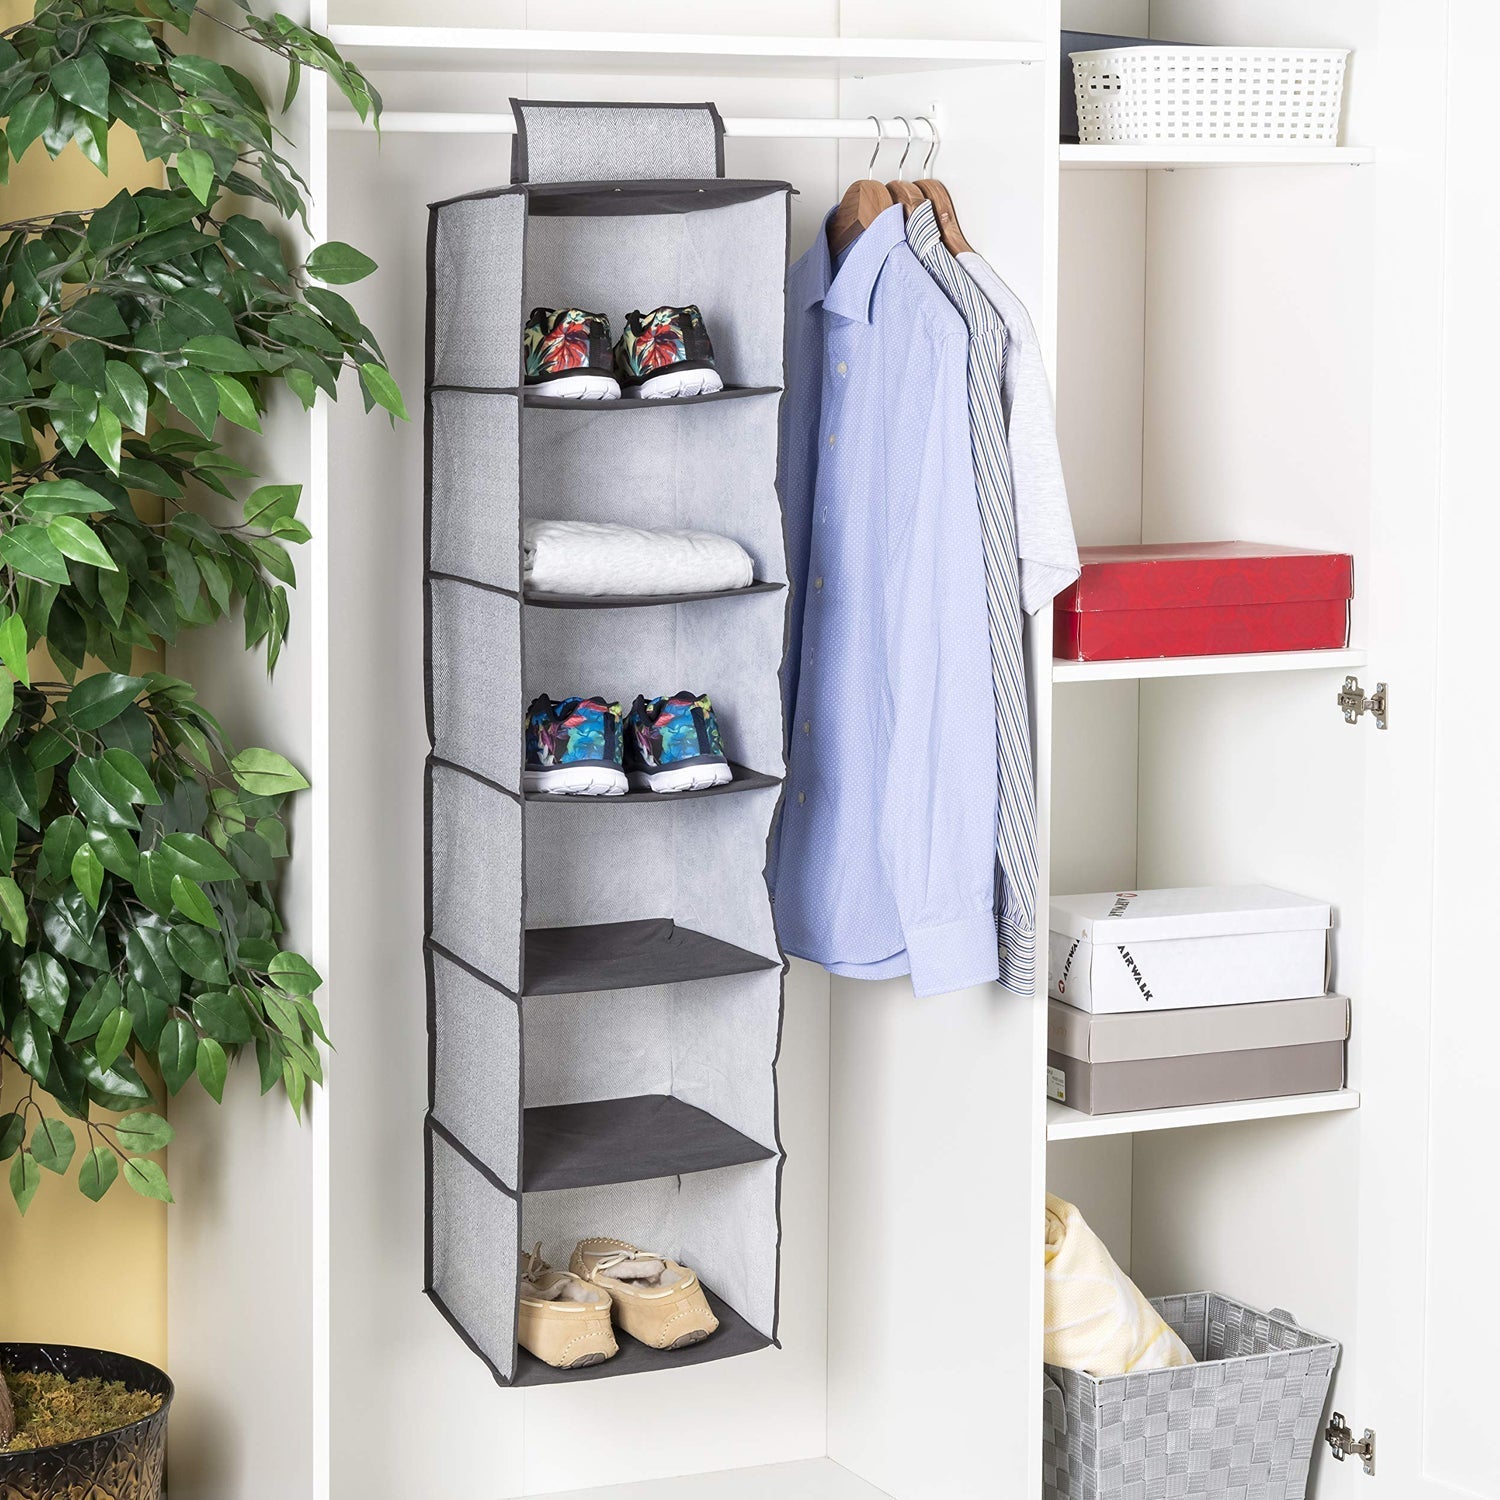 6370  6 Shelf Hanging Closet Organizer, Space Saver, Sweater & Clothing Shelves, Breathable Material Keeps Away Dust & Odors, 